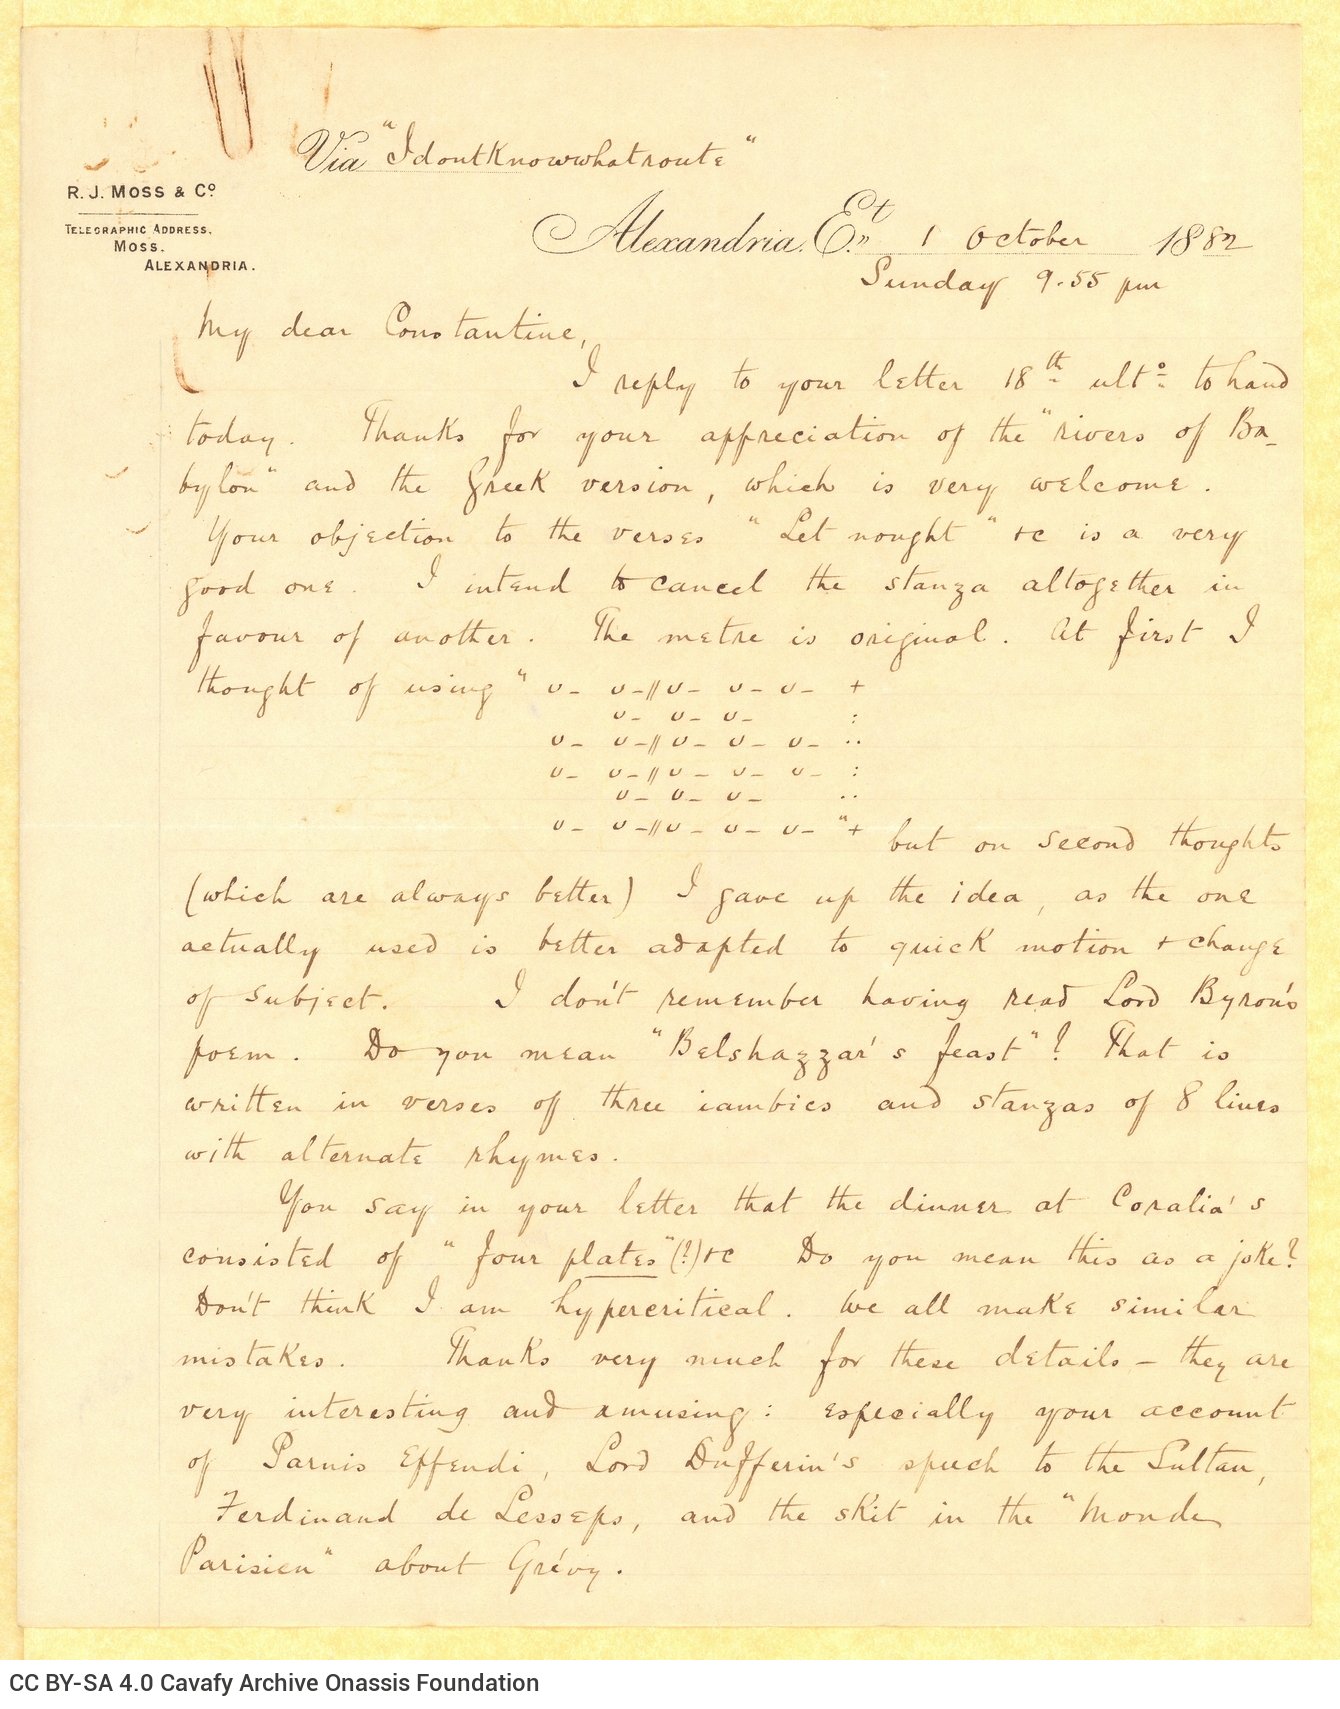 Handwritten letter by John Cavafy to C. P. Cavafy, written over two days, on the first and third pages of two double sheet no